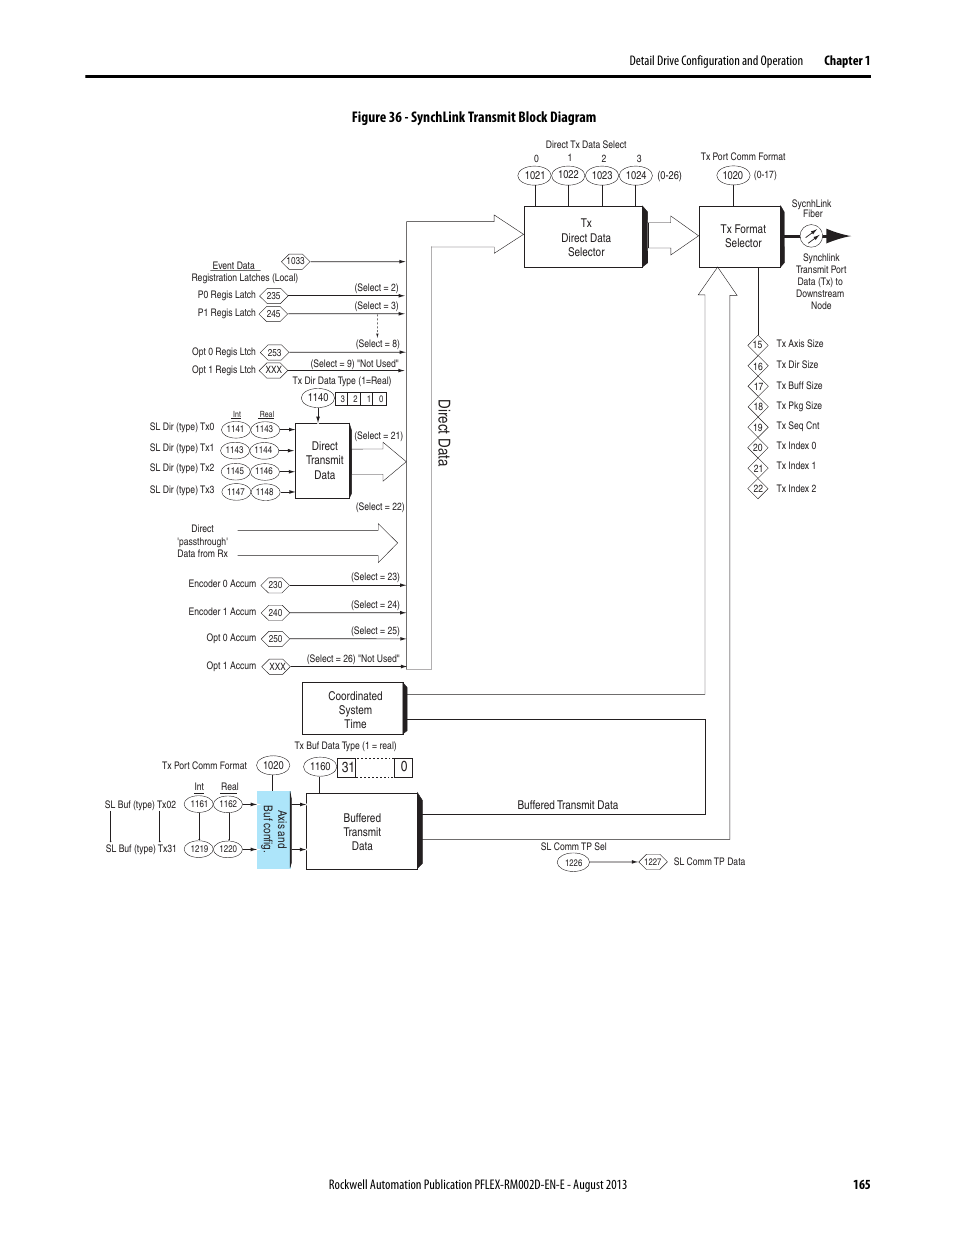 Direct data, Figure 36 - synchlink transmit block diagram | Rockwell Automation 20D PowerFlex 700S with Phase I Control Reference Manual User Manual | Page 165 / 190